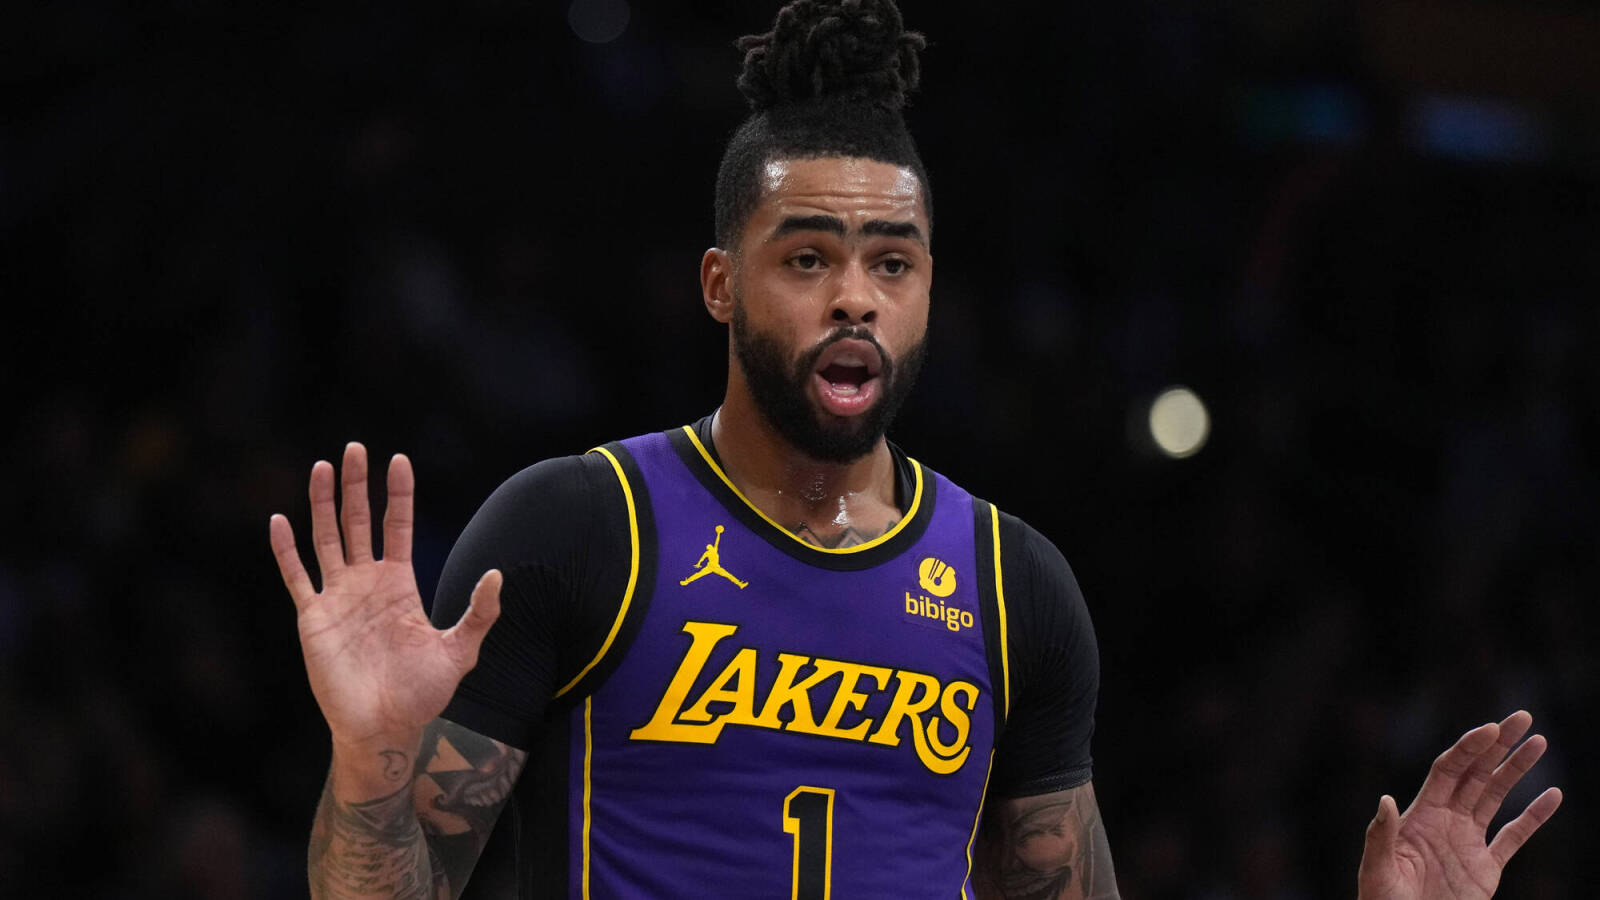 Lakers’ D’Angelo Russell had the most candid response about bounce-pass alley-oop to LeBron James